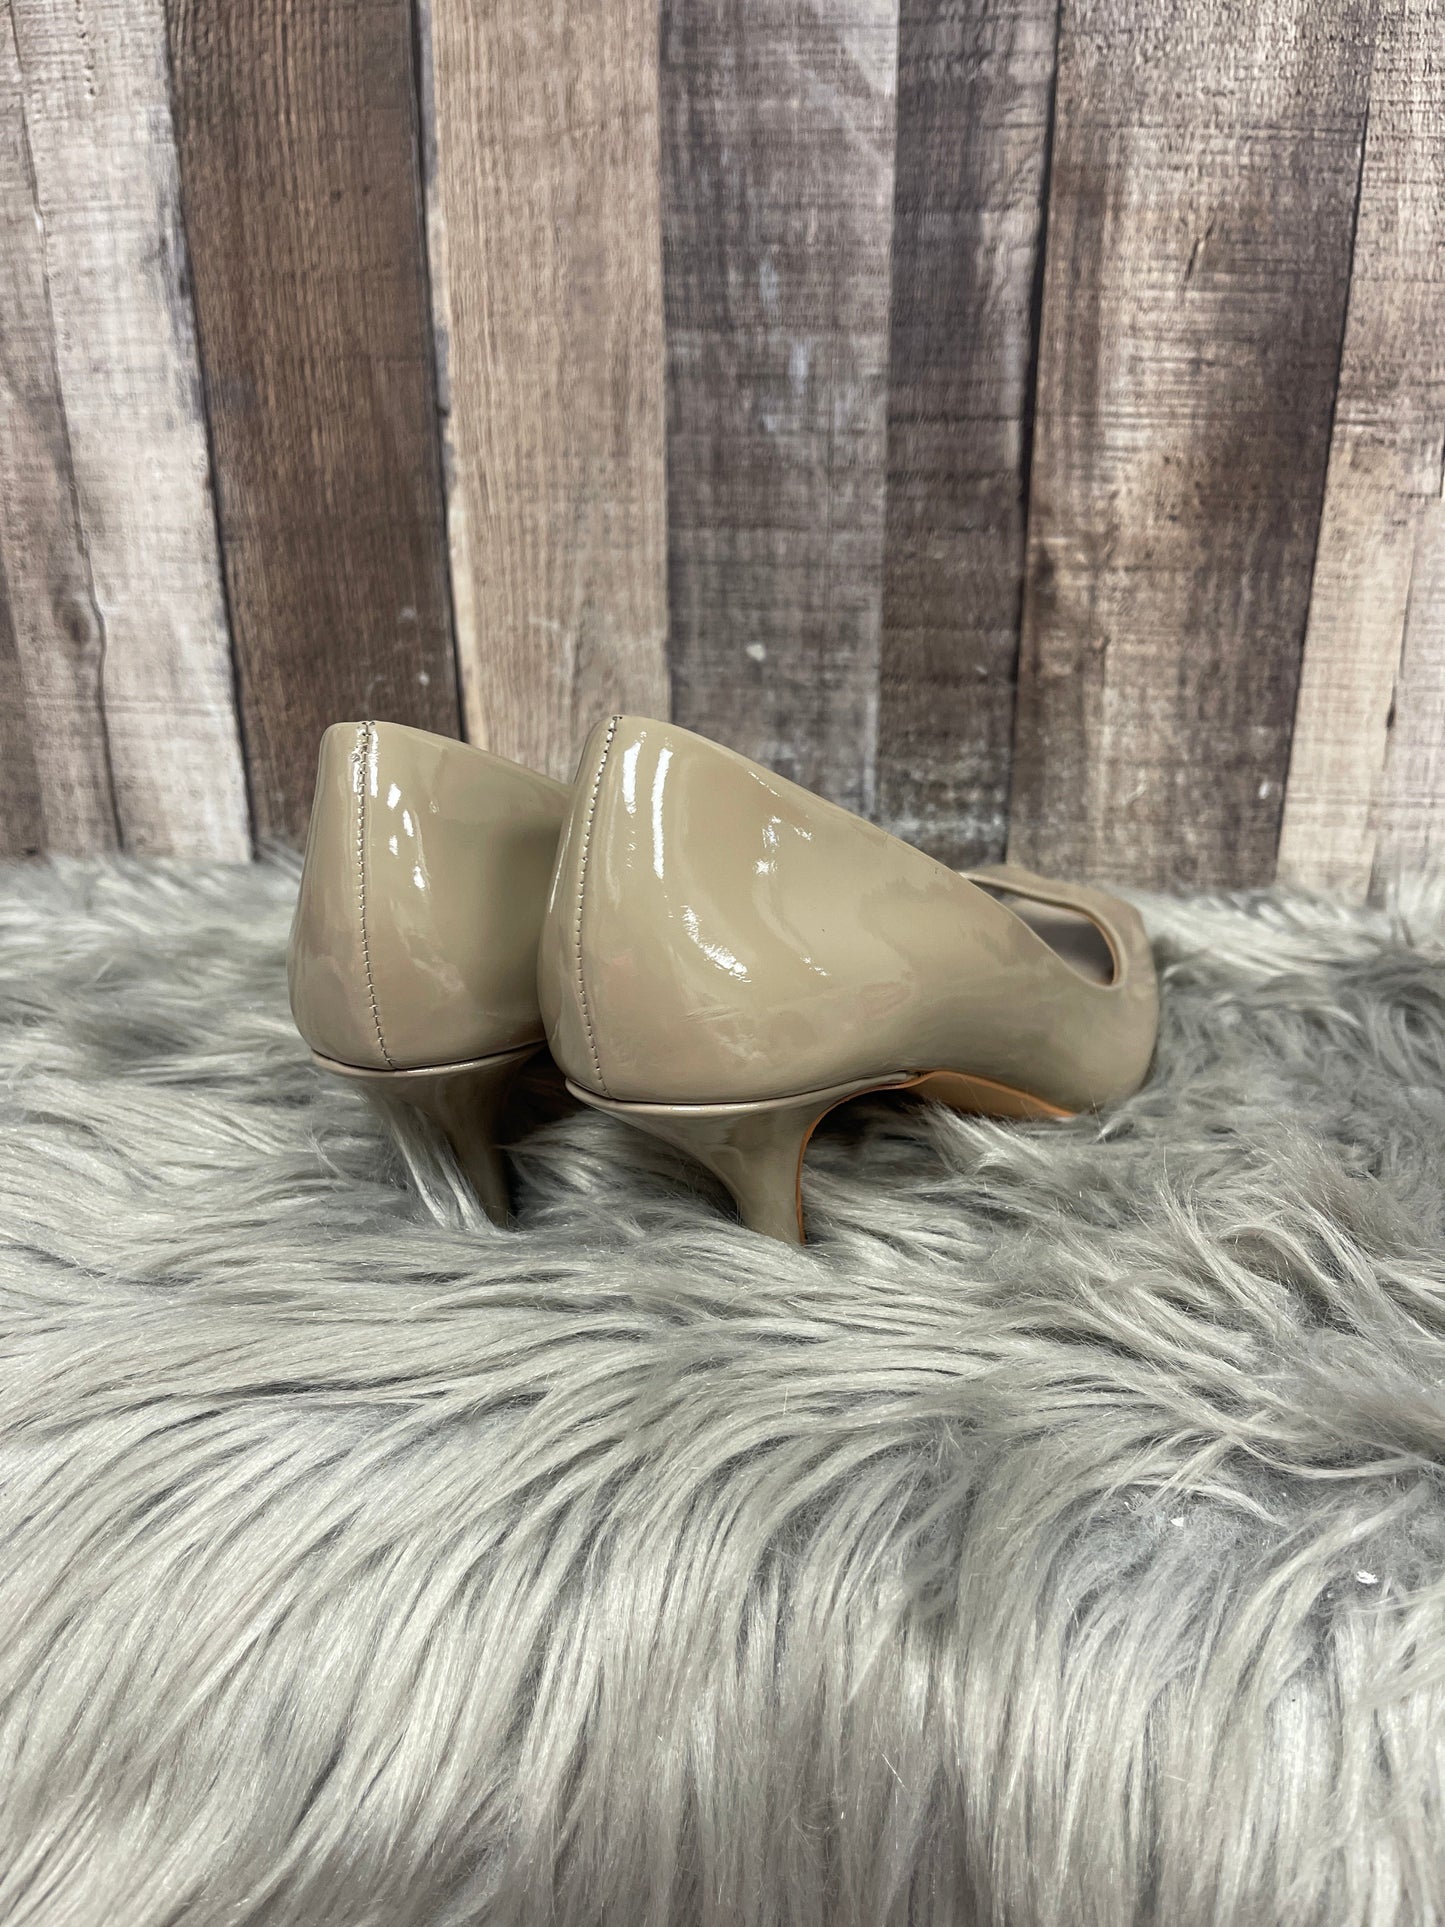 Taupe Shoes Heels Kitten Ann Taylor, Size 8